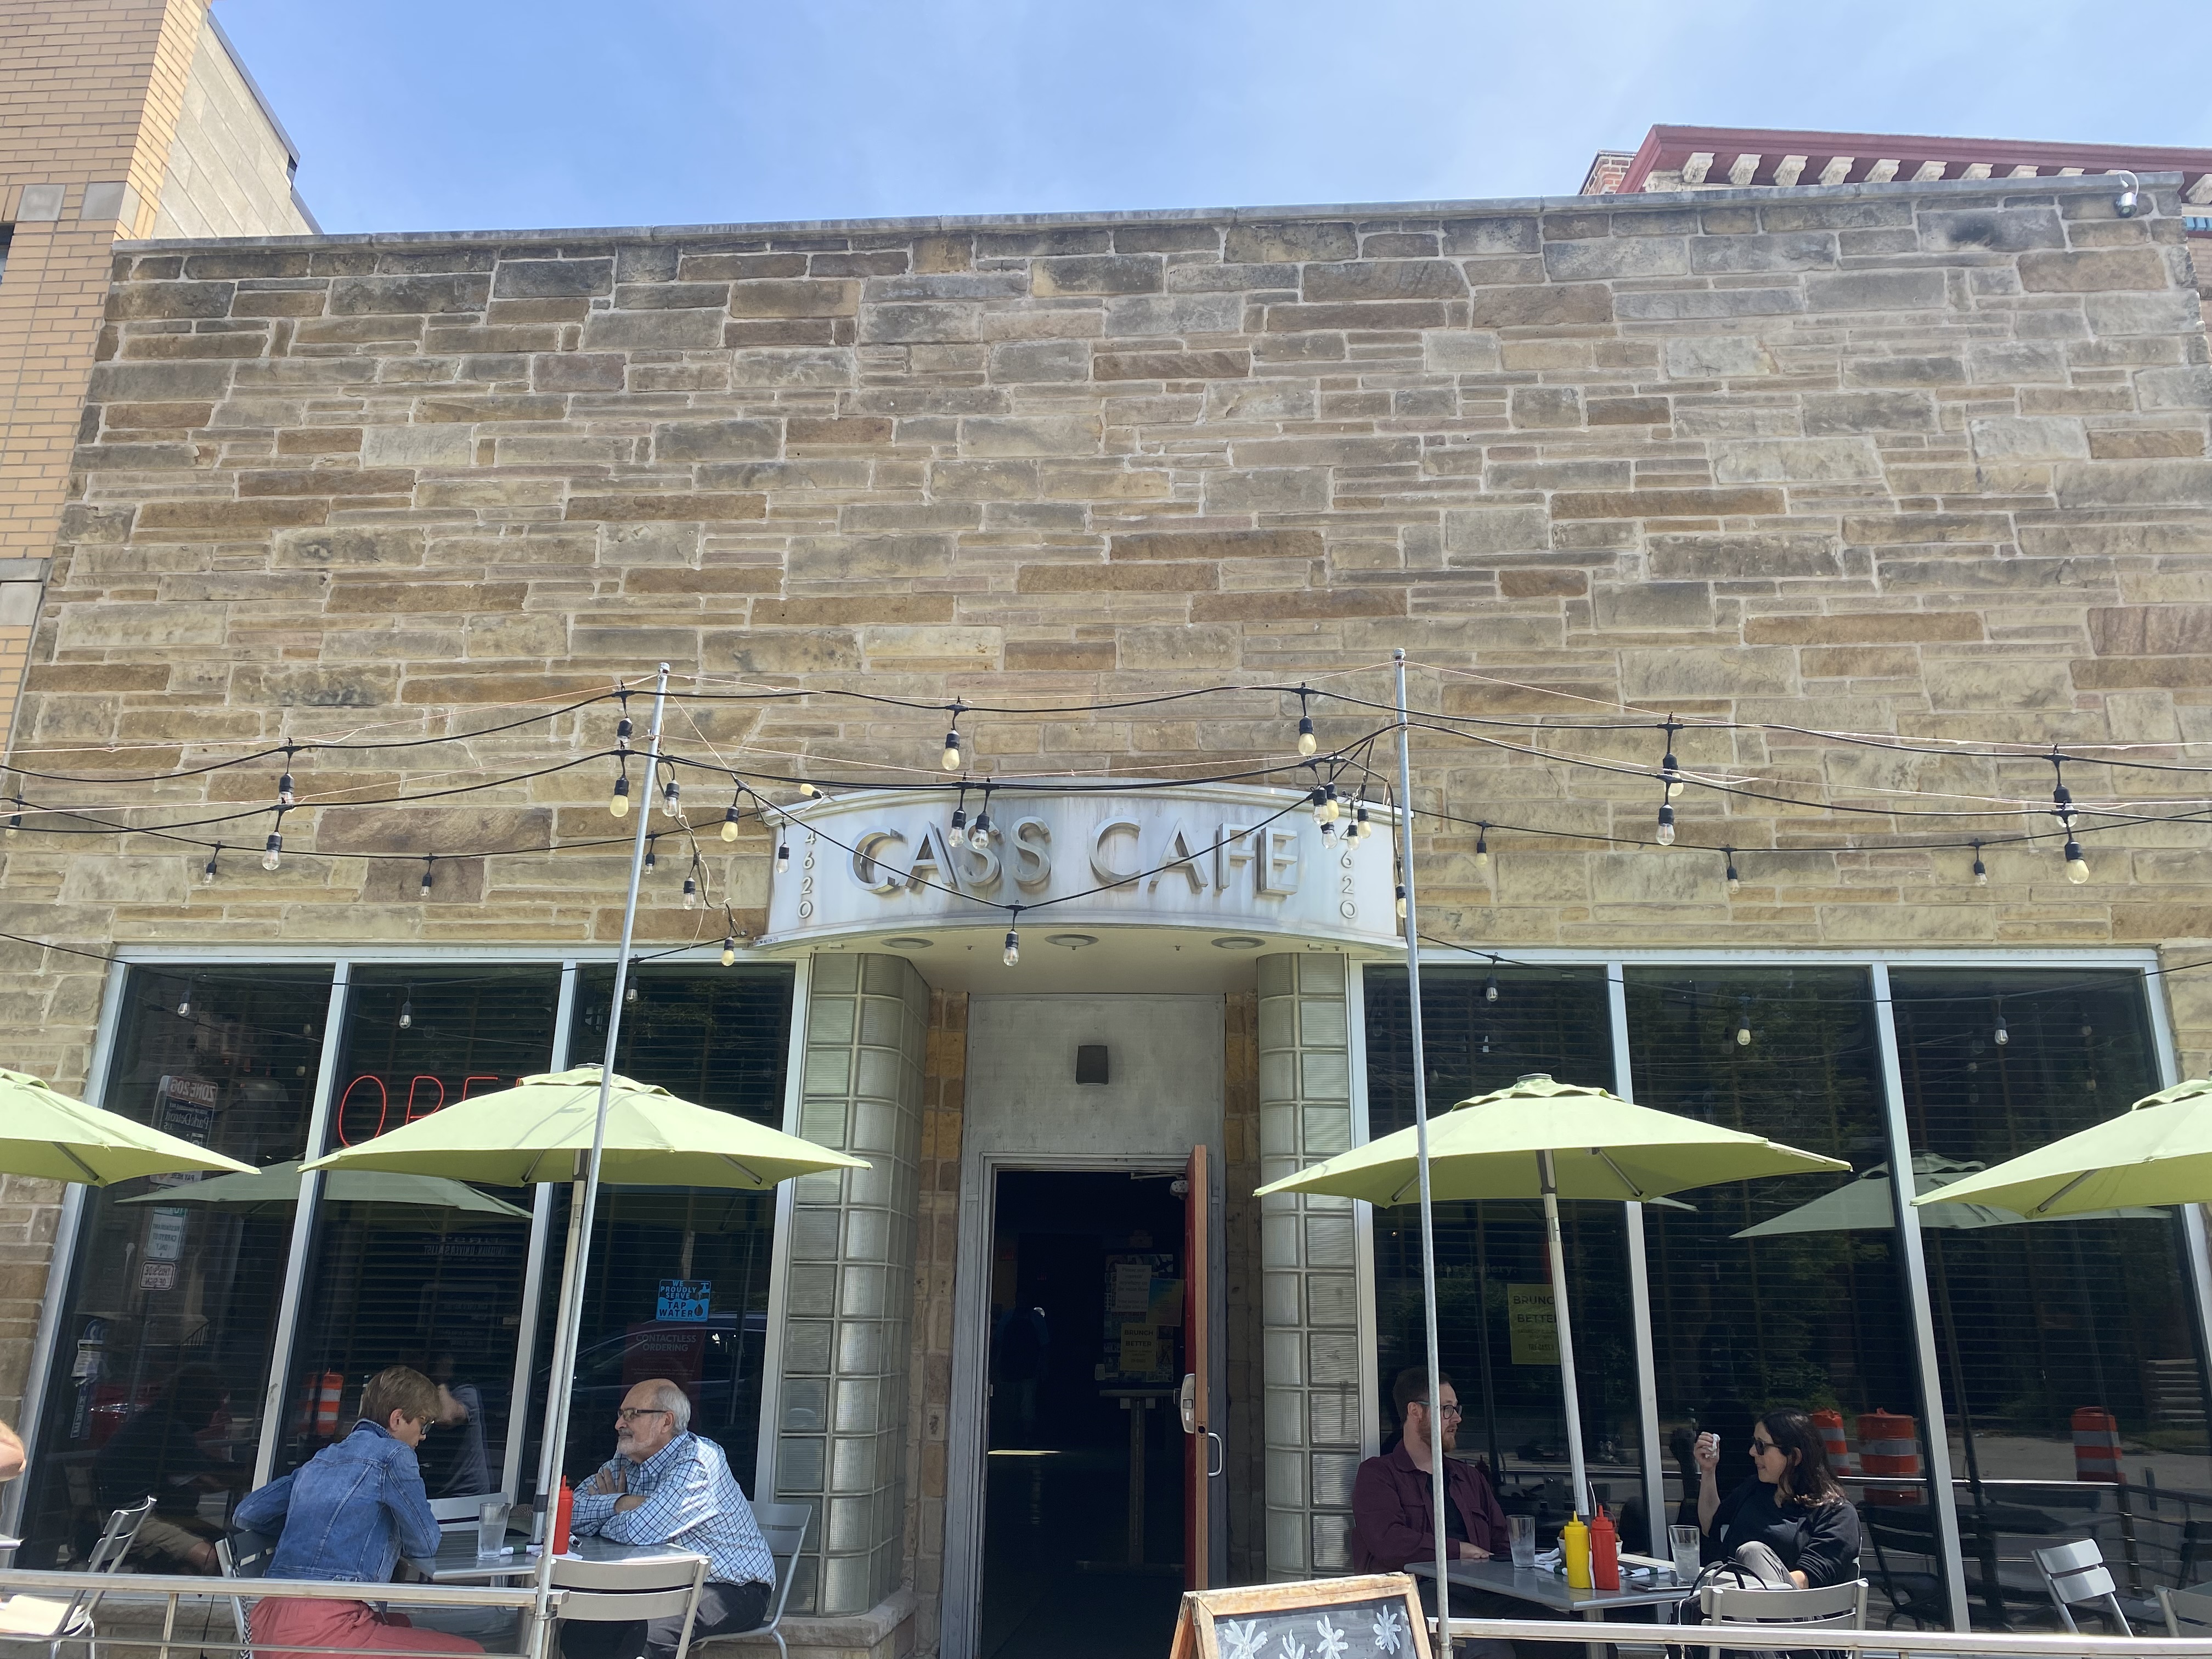 The exterior of Cass Cafe in Midtown, Detroit, Michigan.